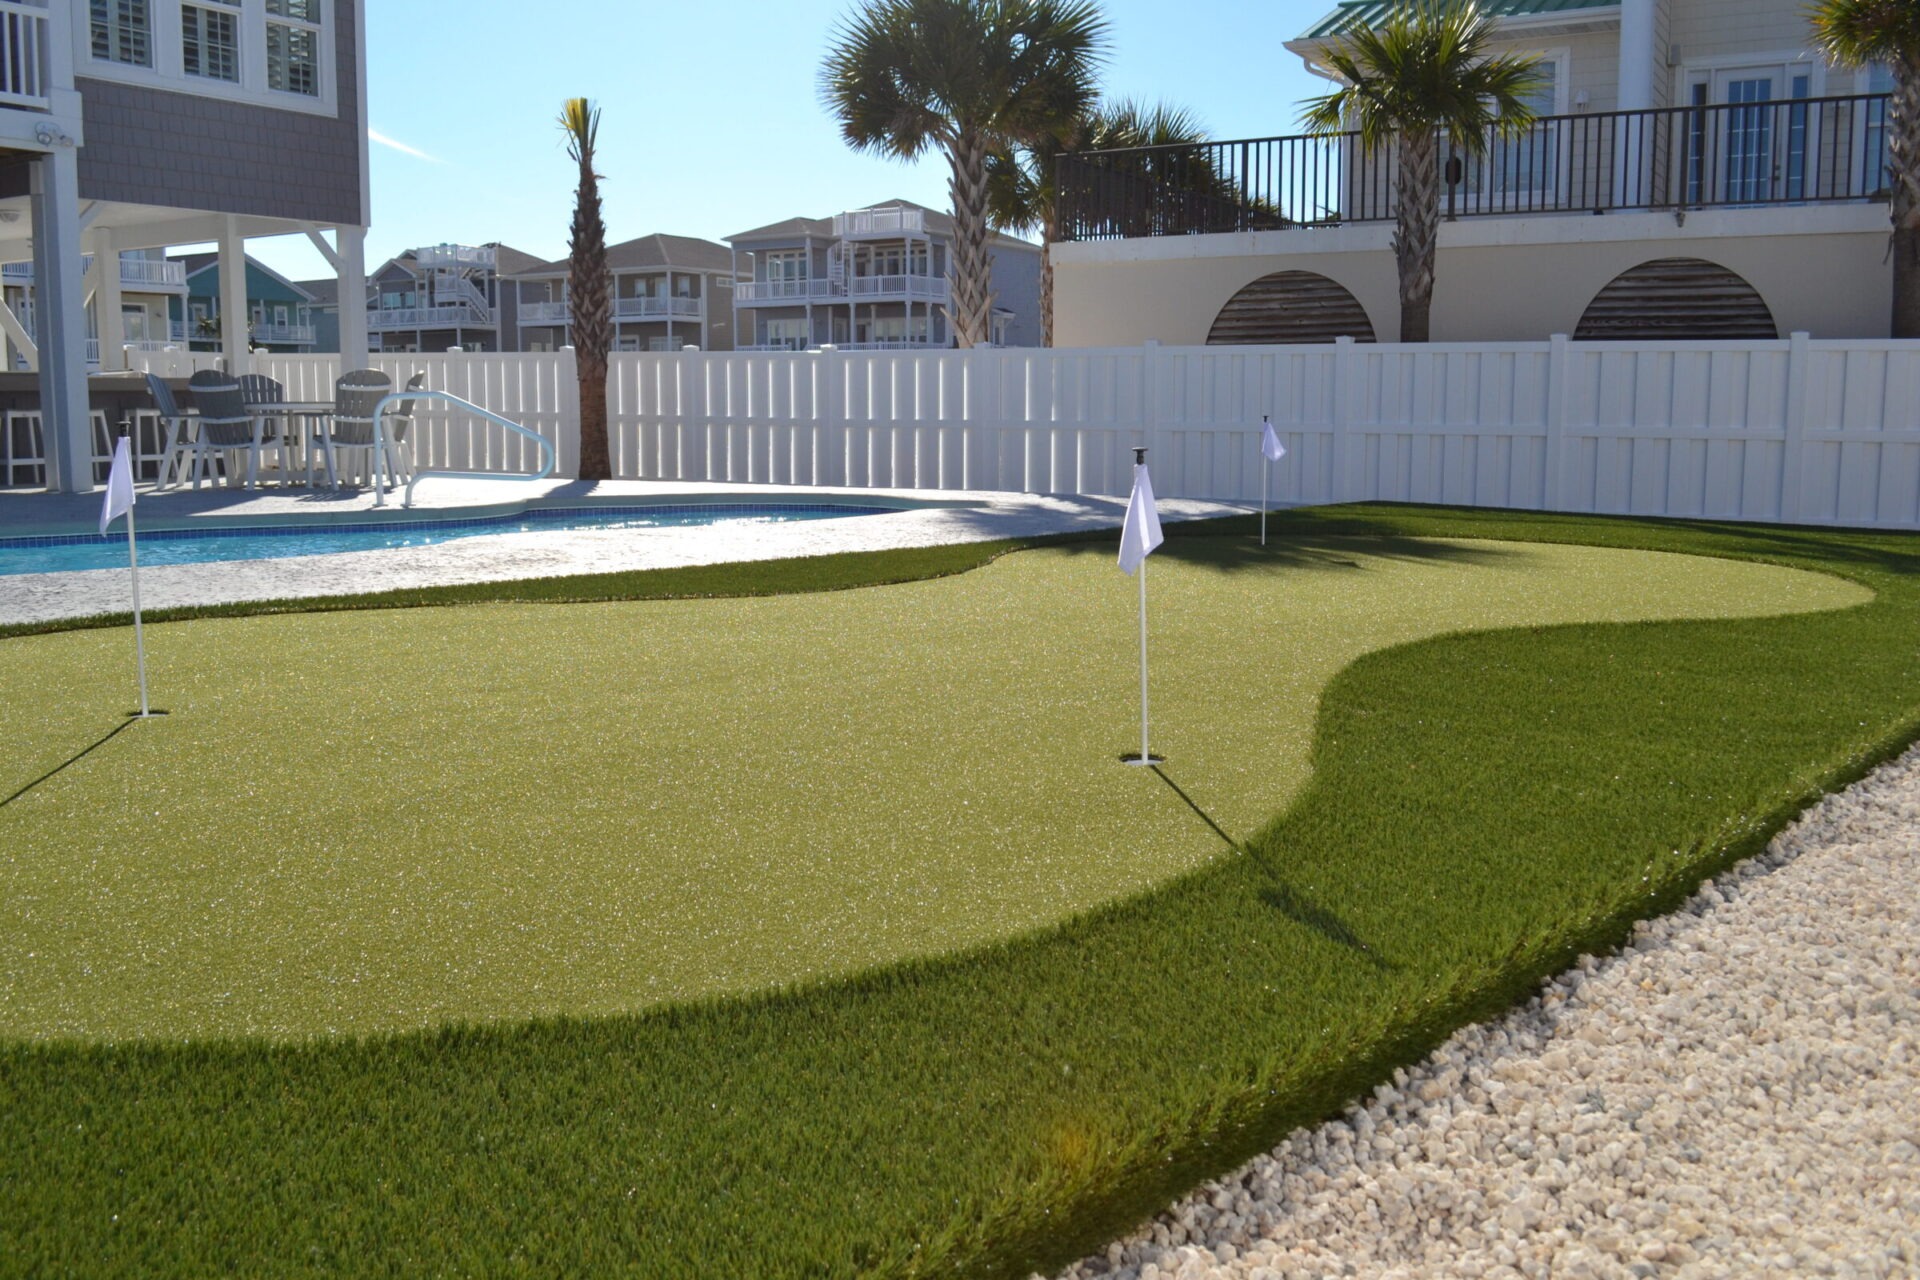 This image shows an artificial turf putting green with two golf holes and flags, near a pool and white-fenced residential buildings on a sunny day.